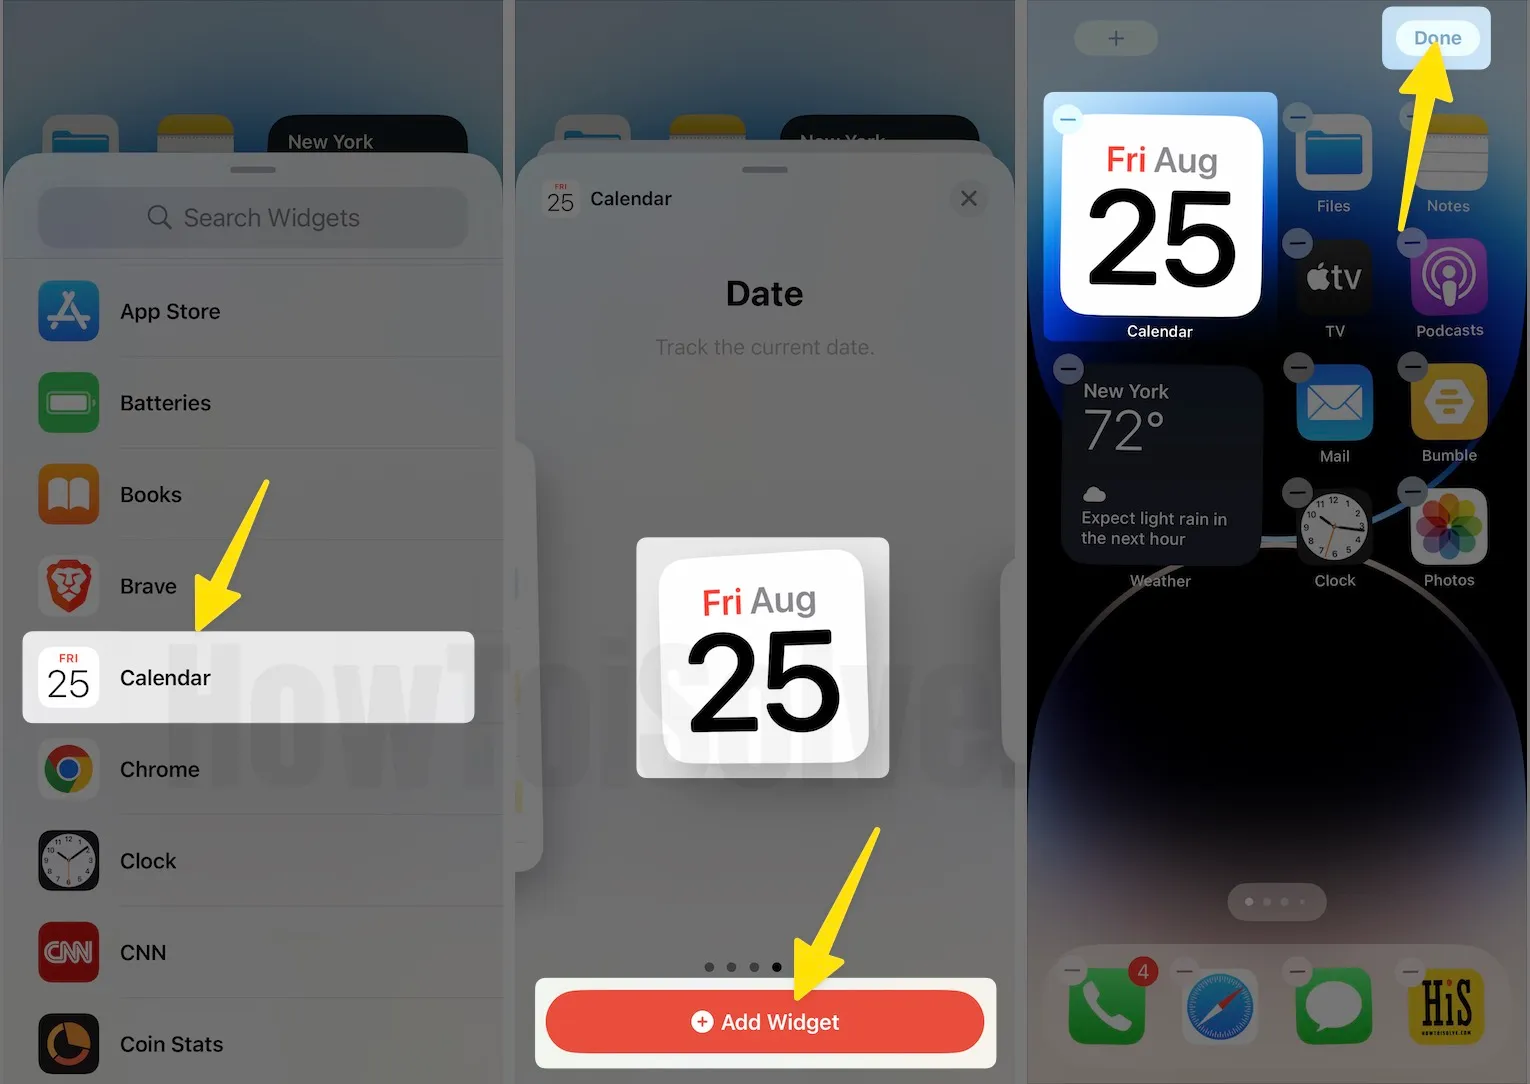 How to Add a Calendar Widget to the Home Screen